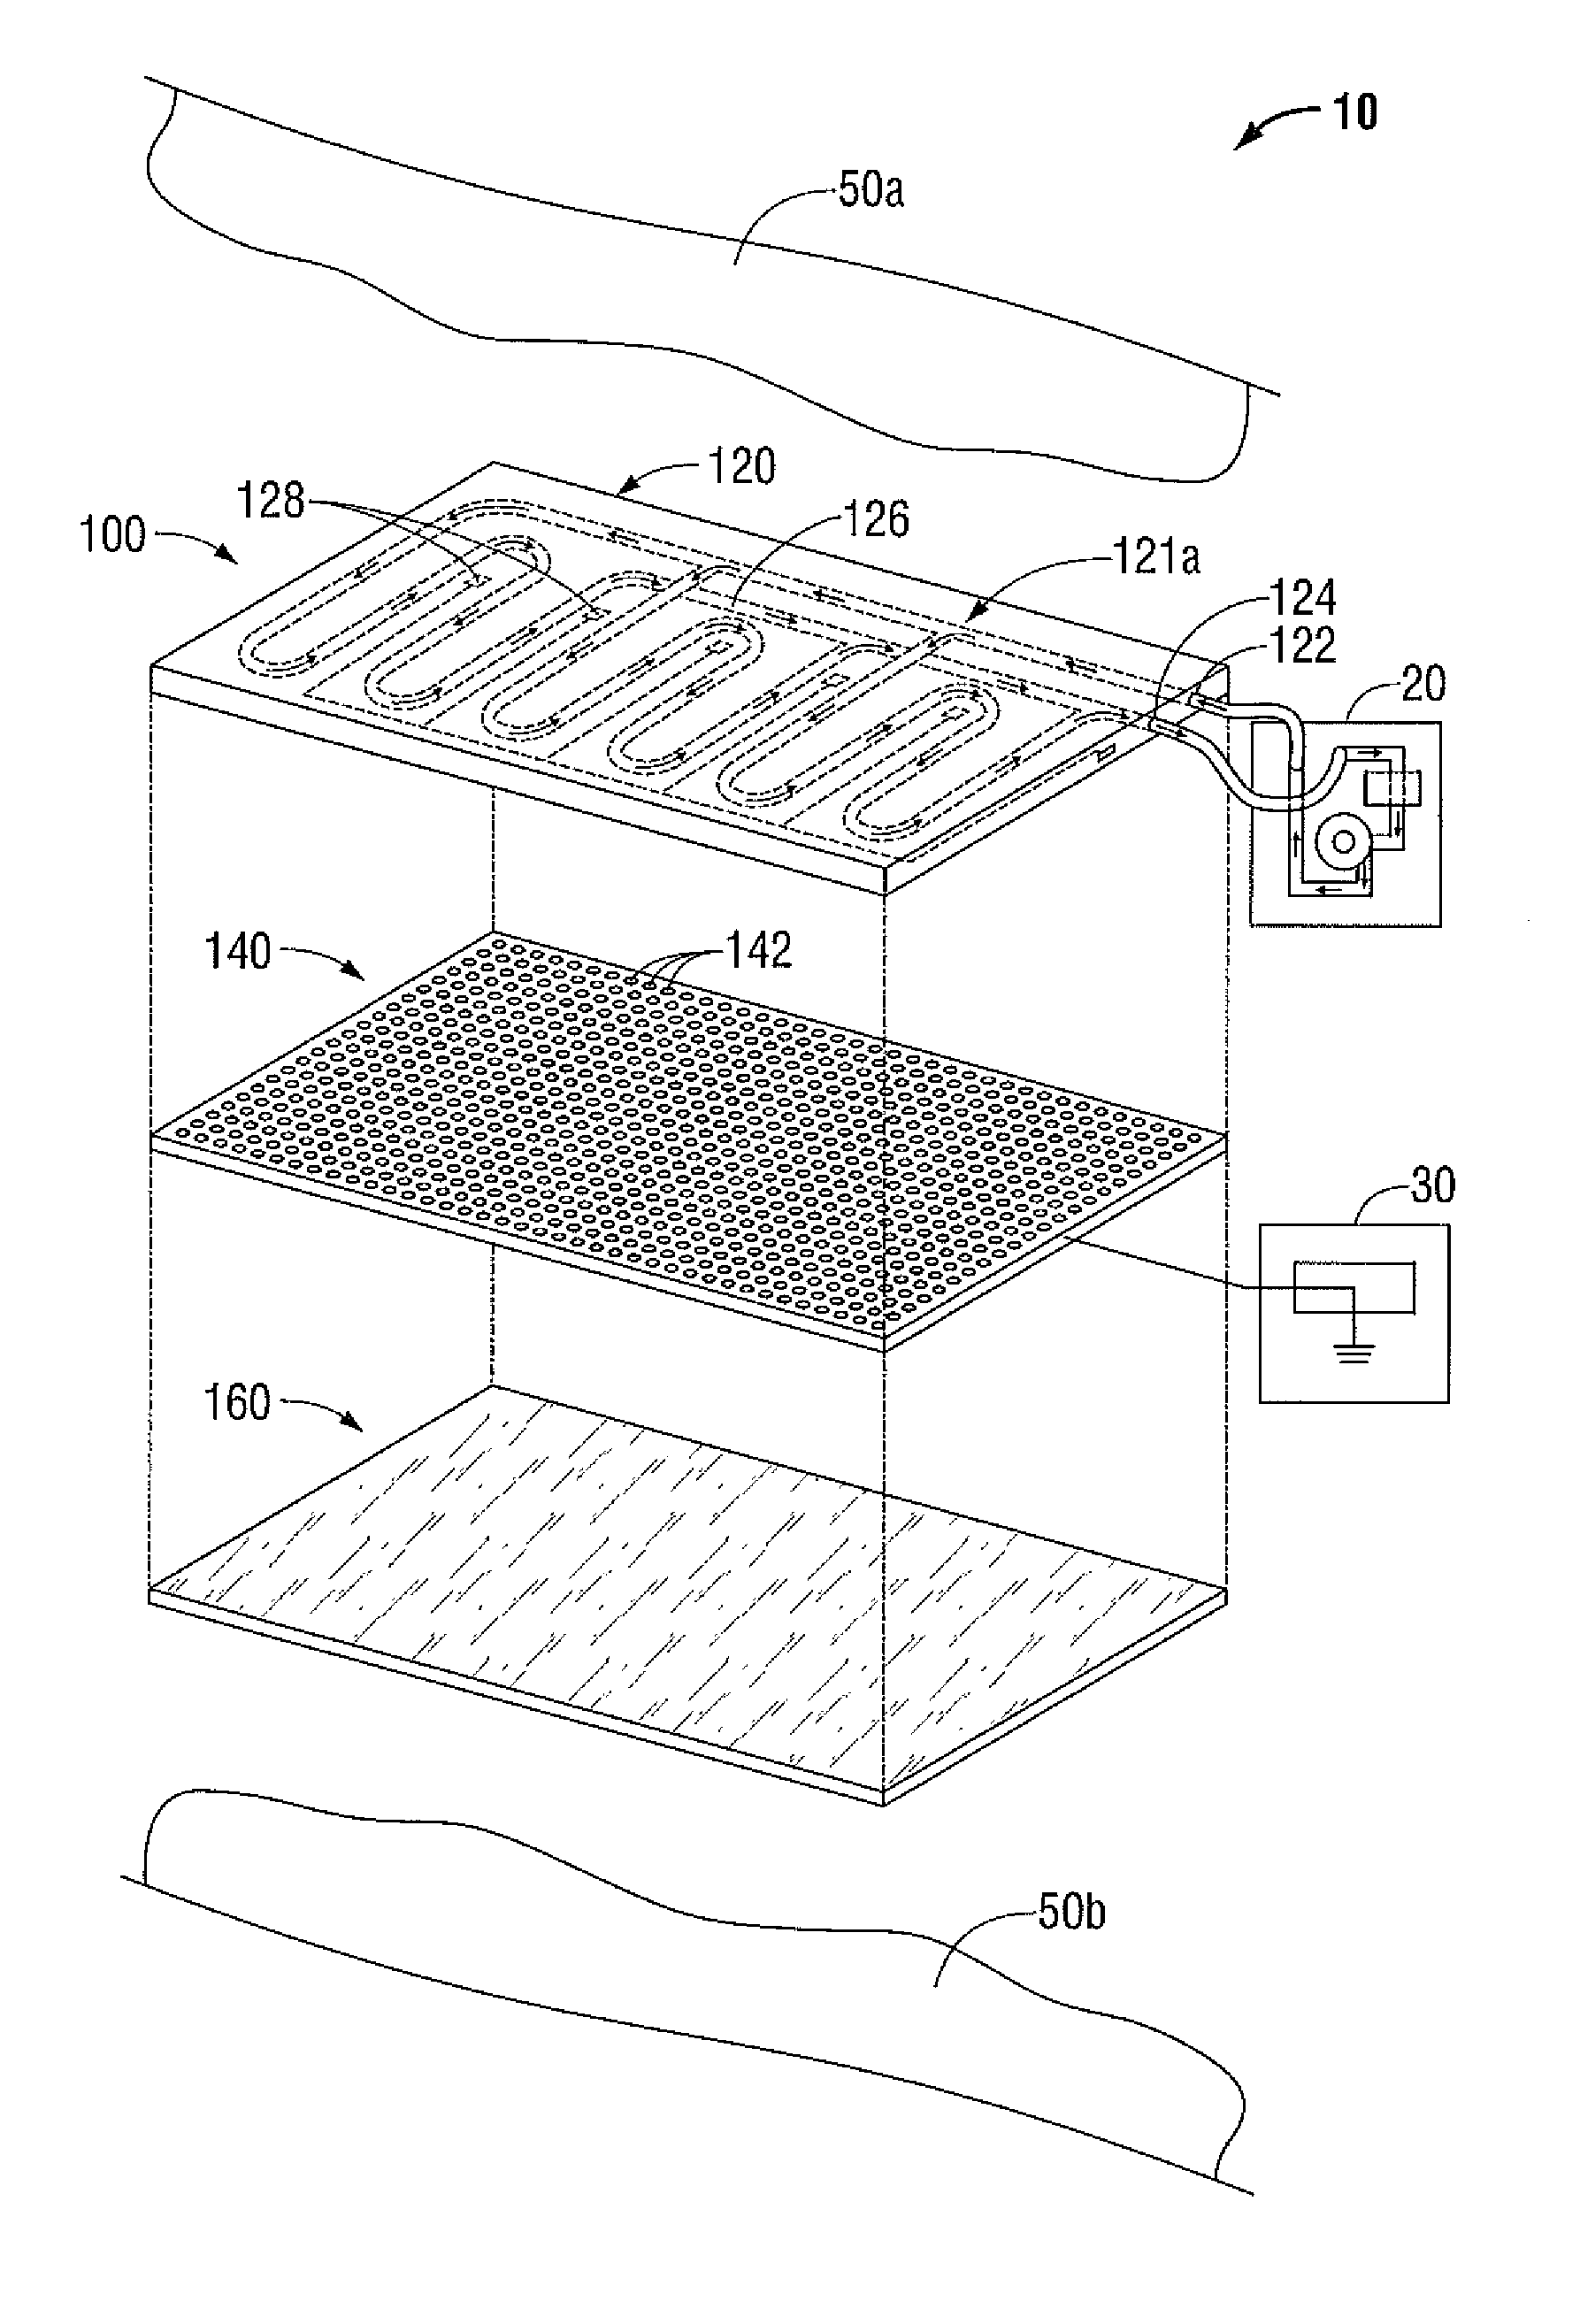 Microwave ablation safety pad, microwave safety pad system and method of use